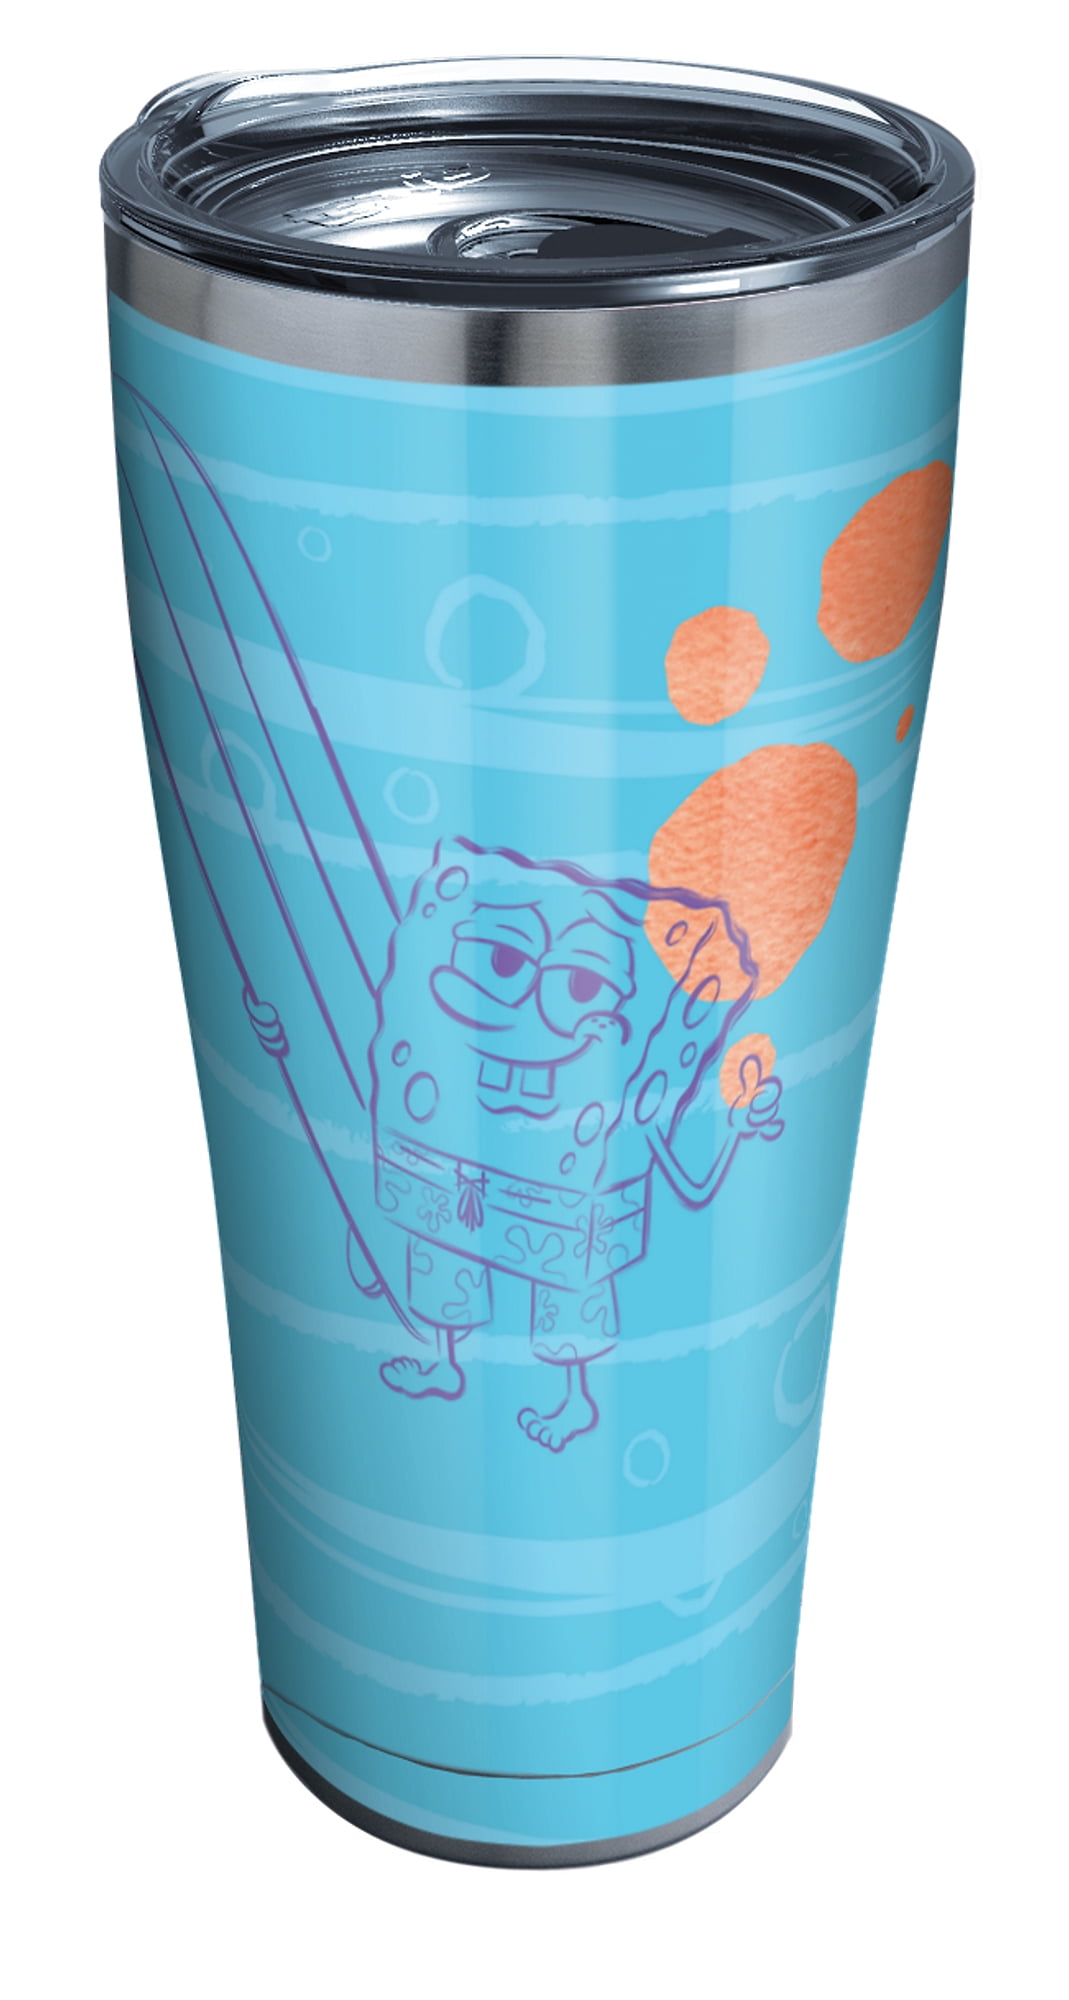 Official The Krusty Krab Insulated Tumbler with Straw